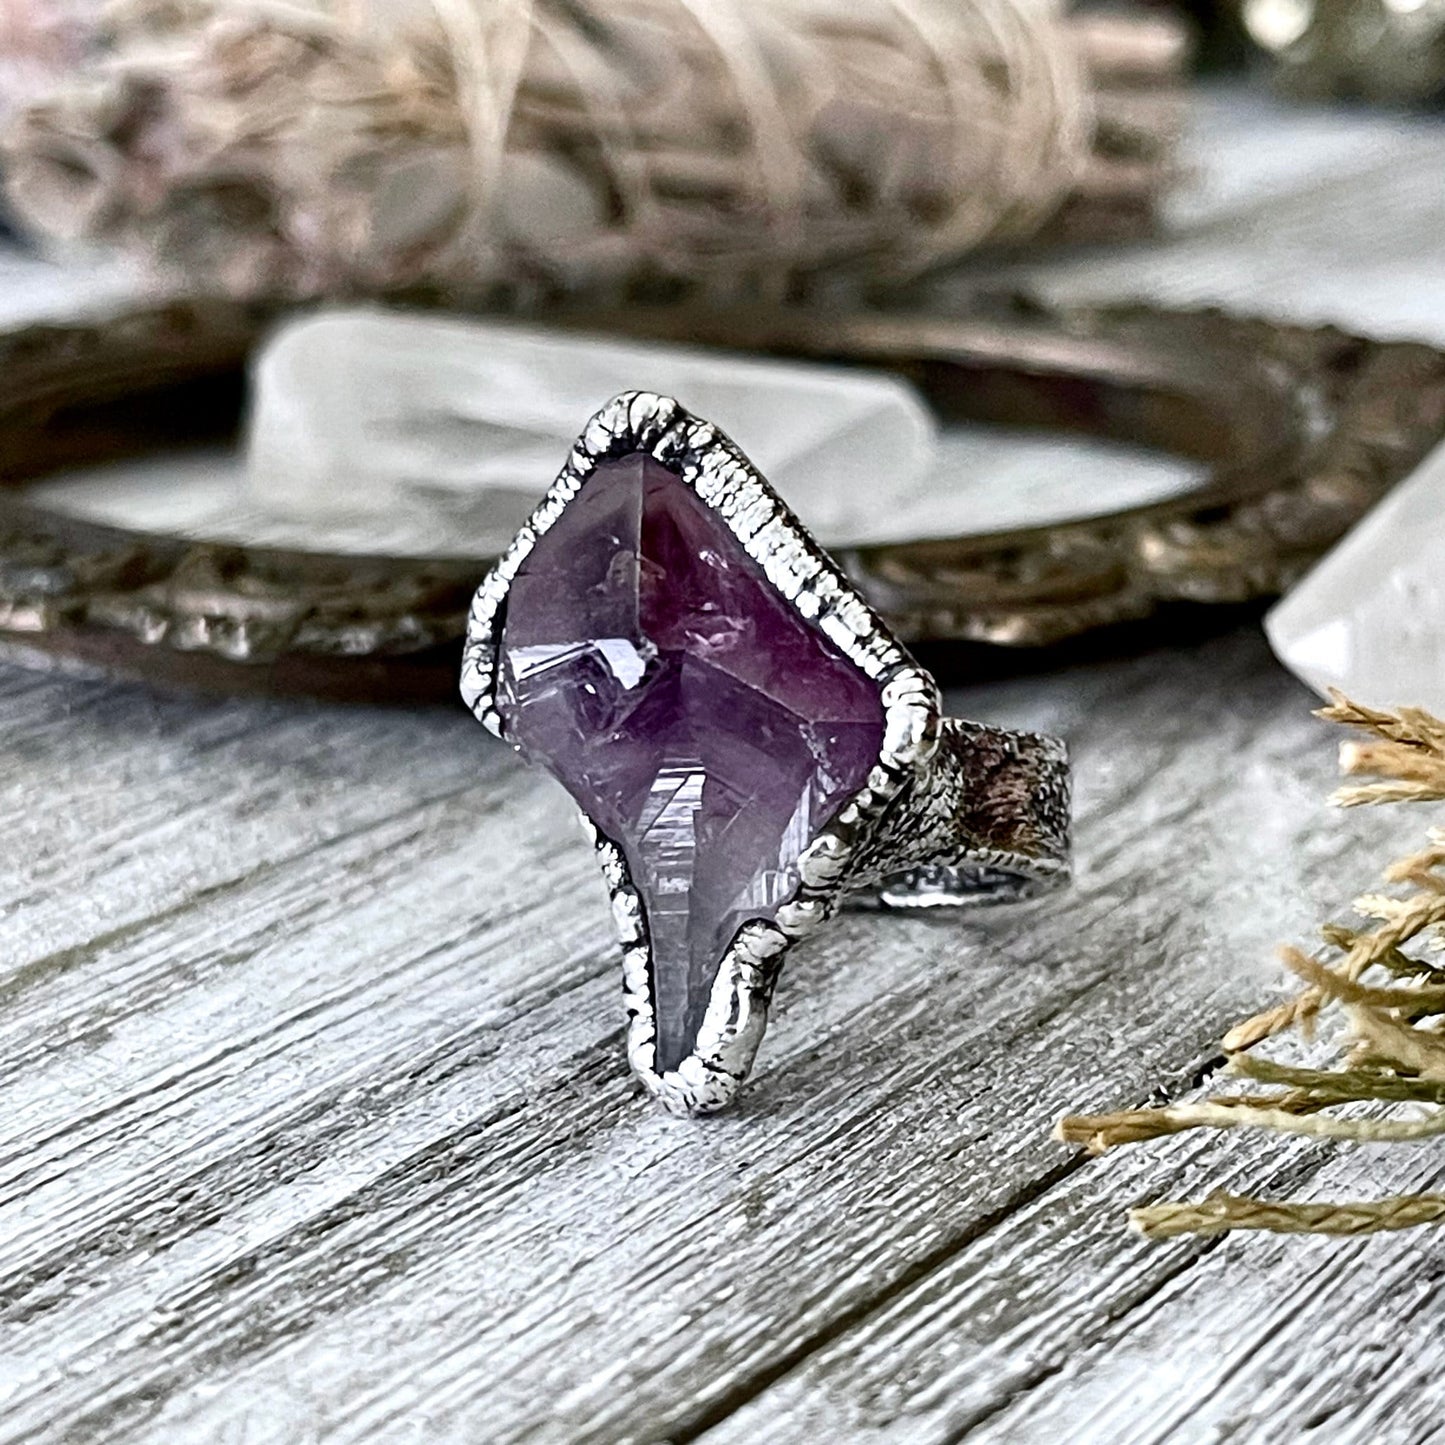 Size 6.5 Big Raw Amethyst Purple Crystal Ring in Fine Silver / Foxlark Collection - One of a Kind